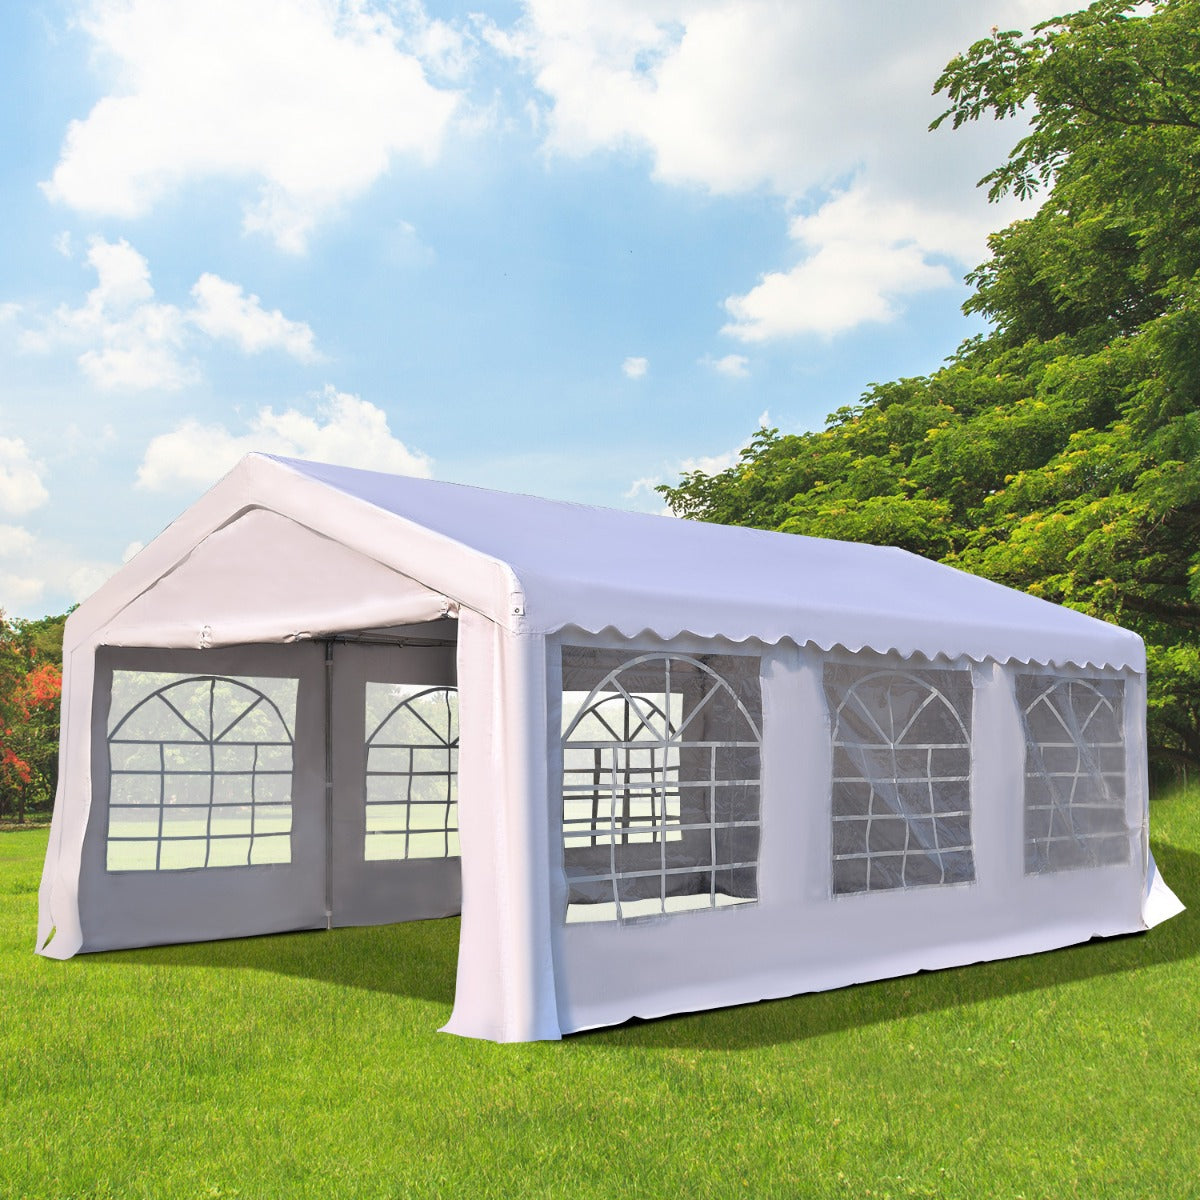 Outsunny Gazebo Marquee Party Tent Wedding Canopy Steel Frame Water Resistant size 6x4 m-White